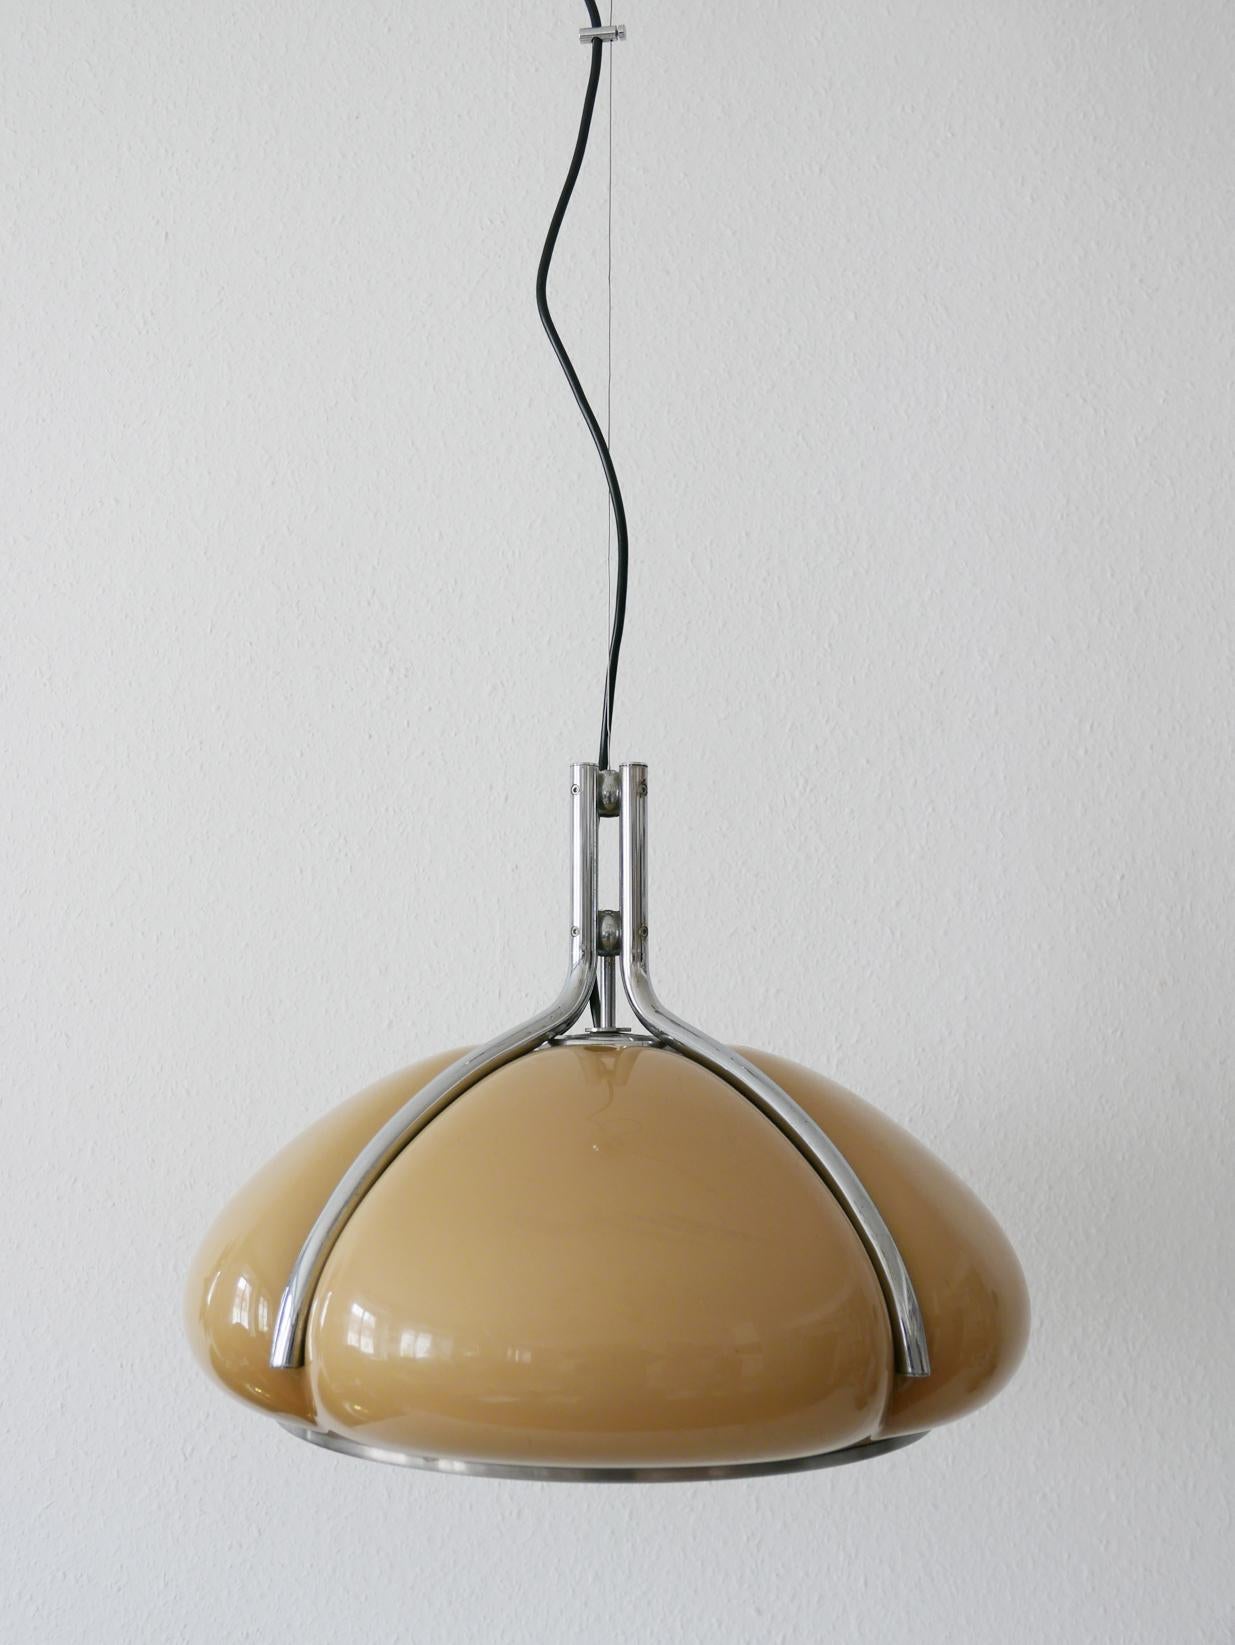 Elegant Mid-Century Modern pendant lamp or hanging light Quadrifoglio in biomorphic shape. Manufactured by Harvey Guzzini, 1960s, Italy, it is an eye catching light object.

Executed in orange colored plexiglas and chrome-plated metal. It comes